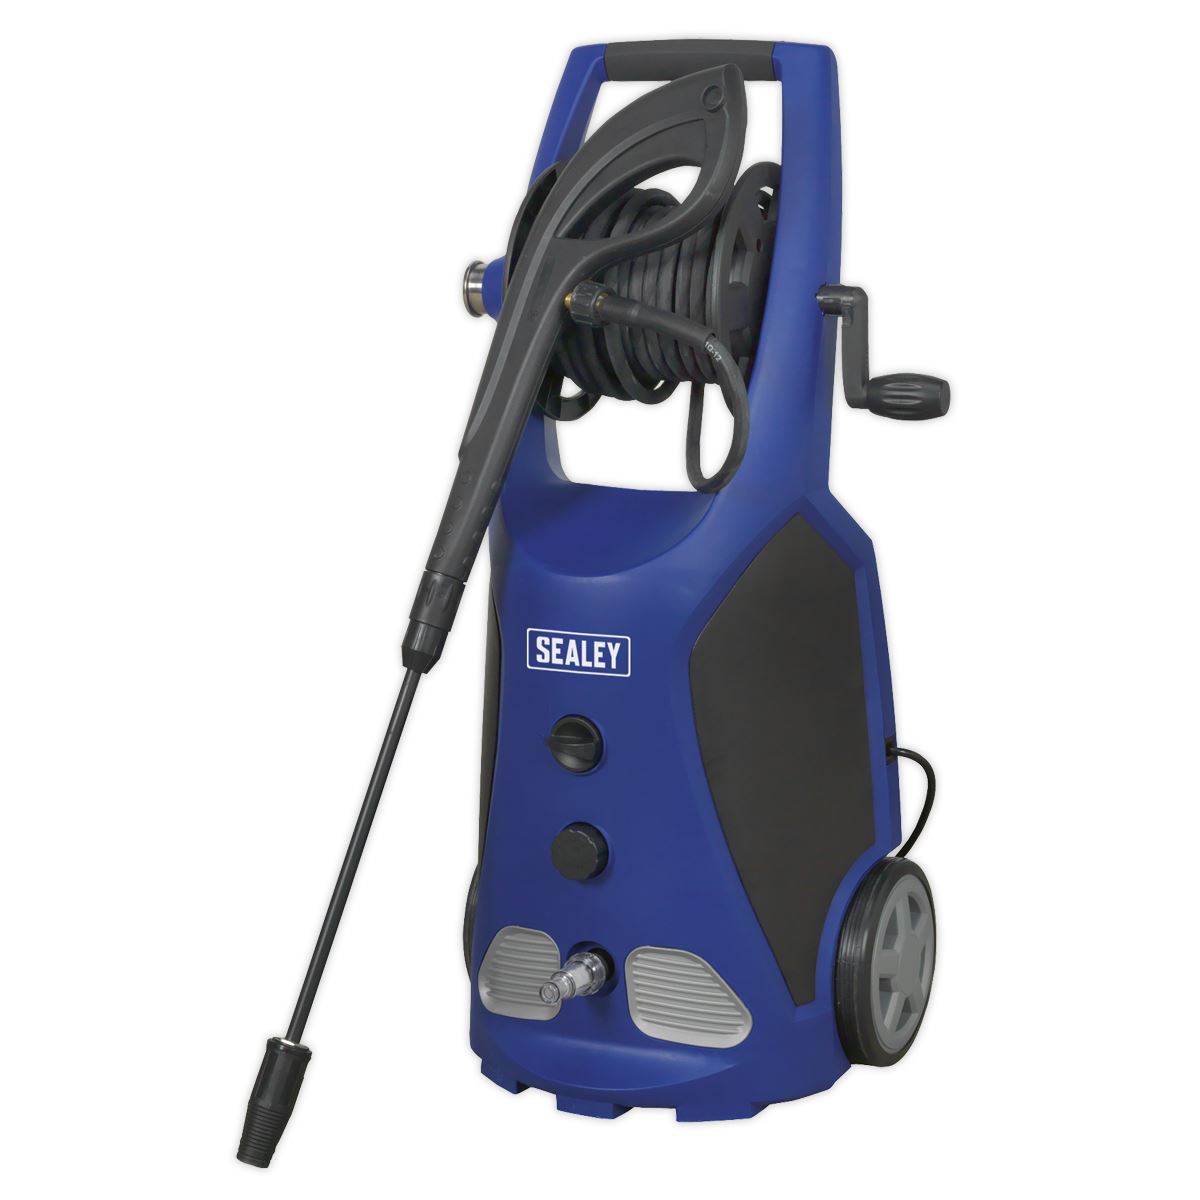 Sealey Professional Pressure Washer 140bar with Accessories